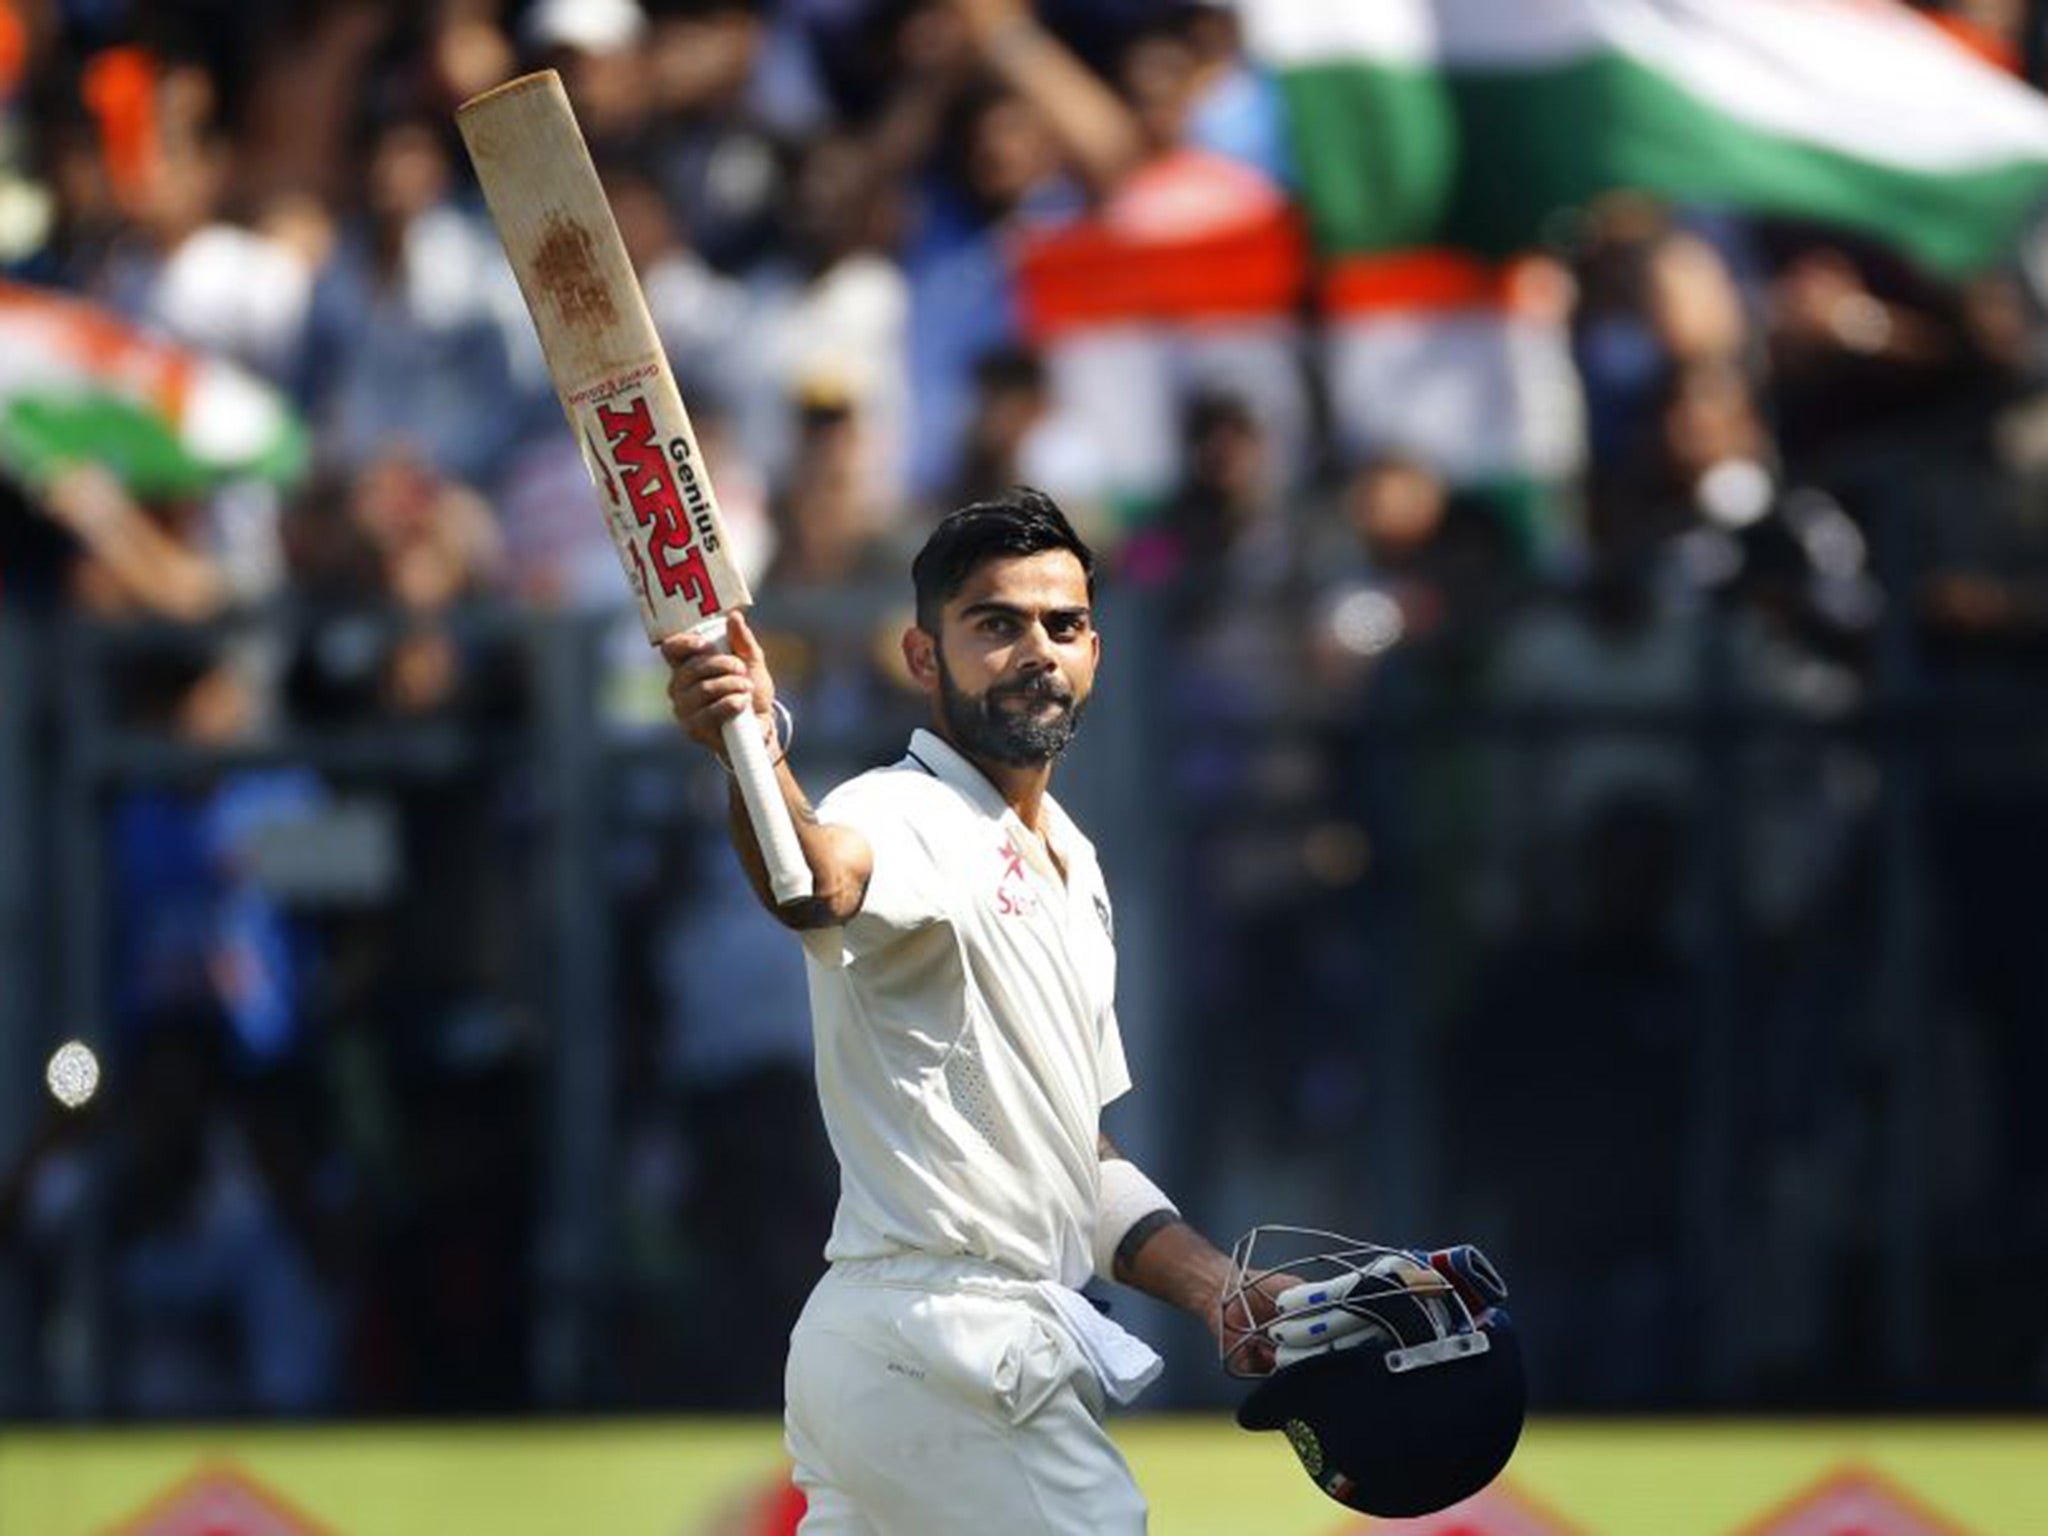 Kohli scored a personal-best 235 in a ground-record total of 631